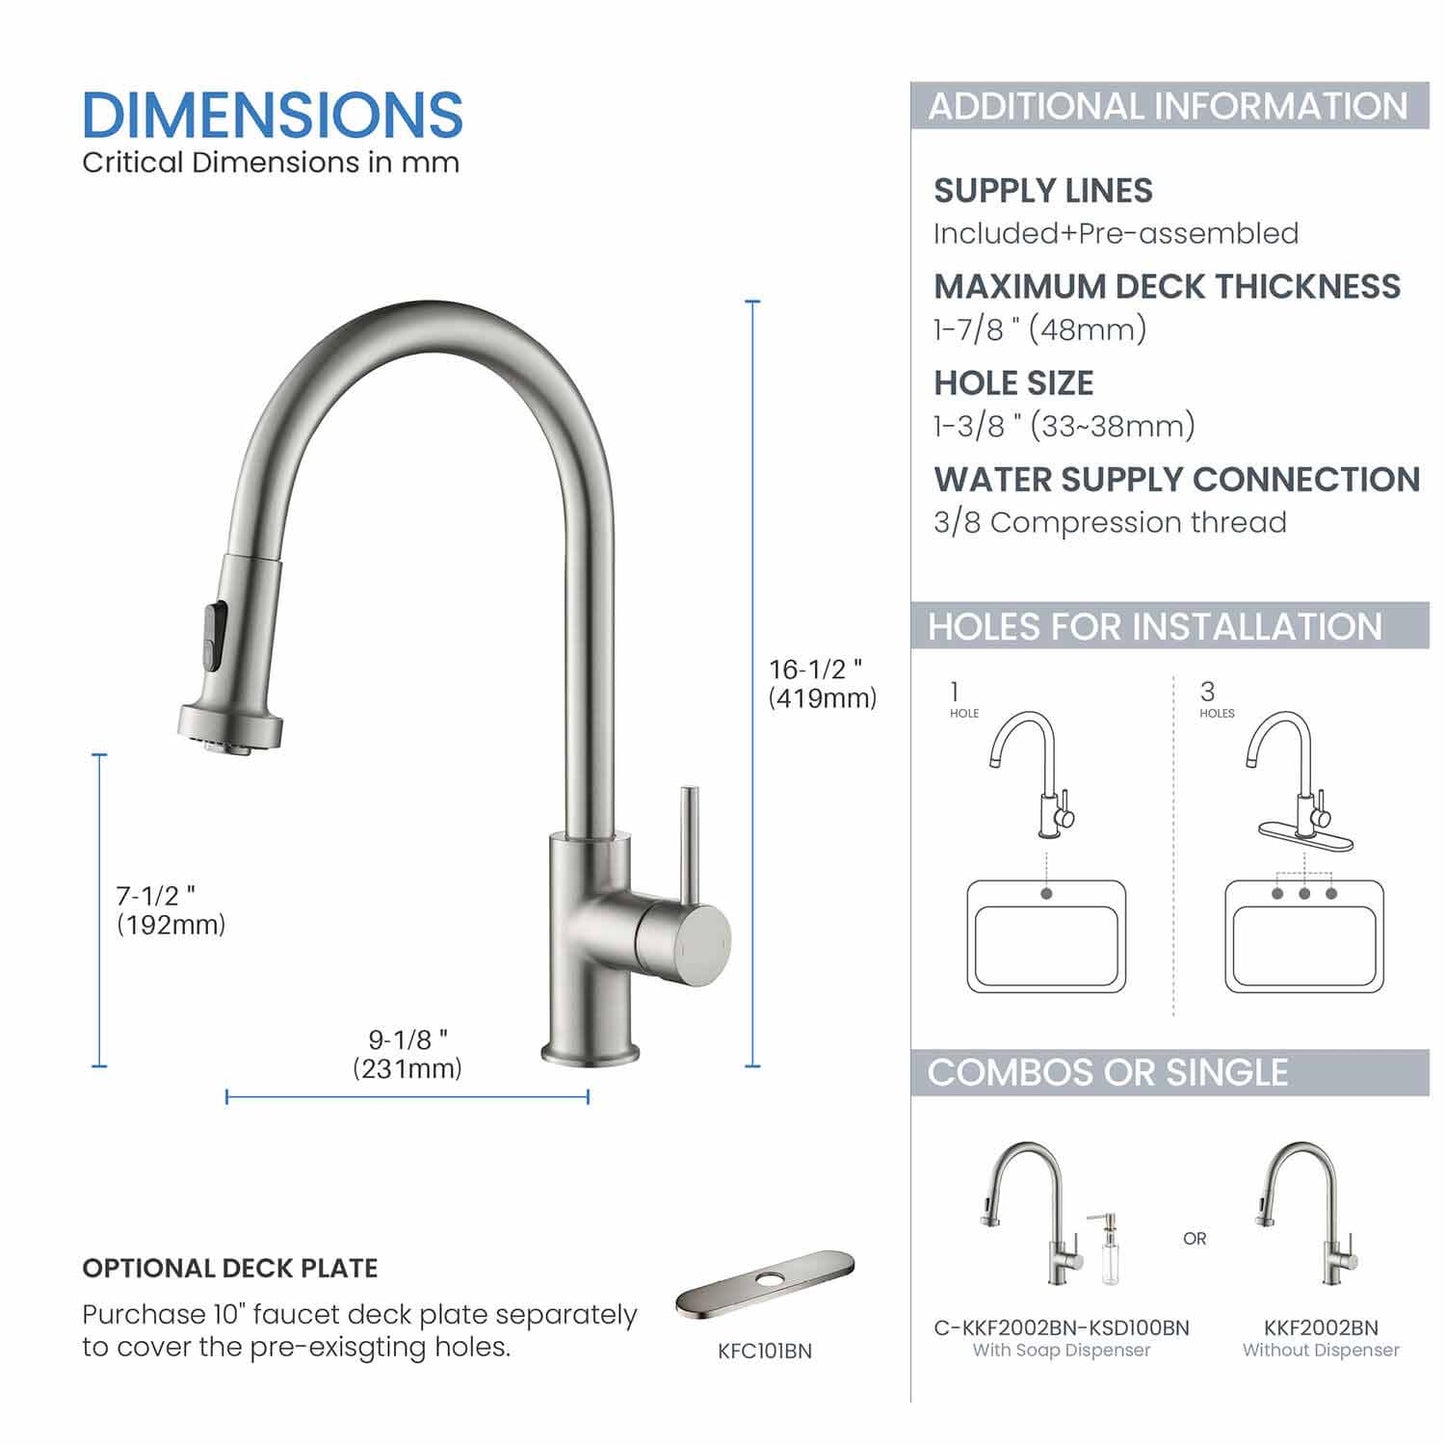 Kibi Casa Single Handle High Arc Pull Down Kitchen Faucet With Soap Dispenser in Brushed Nickel Finish